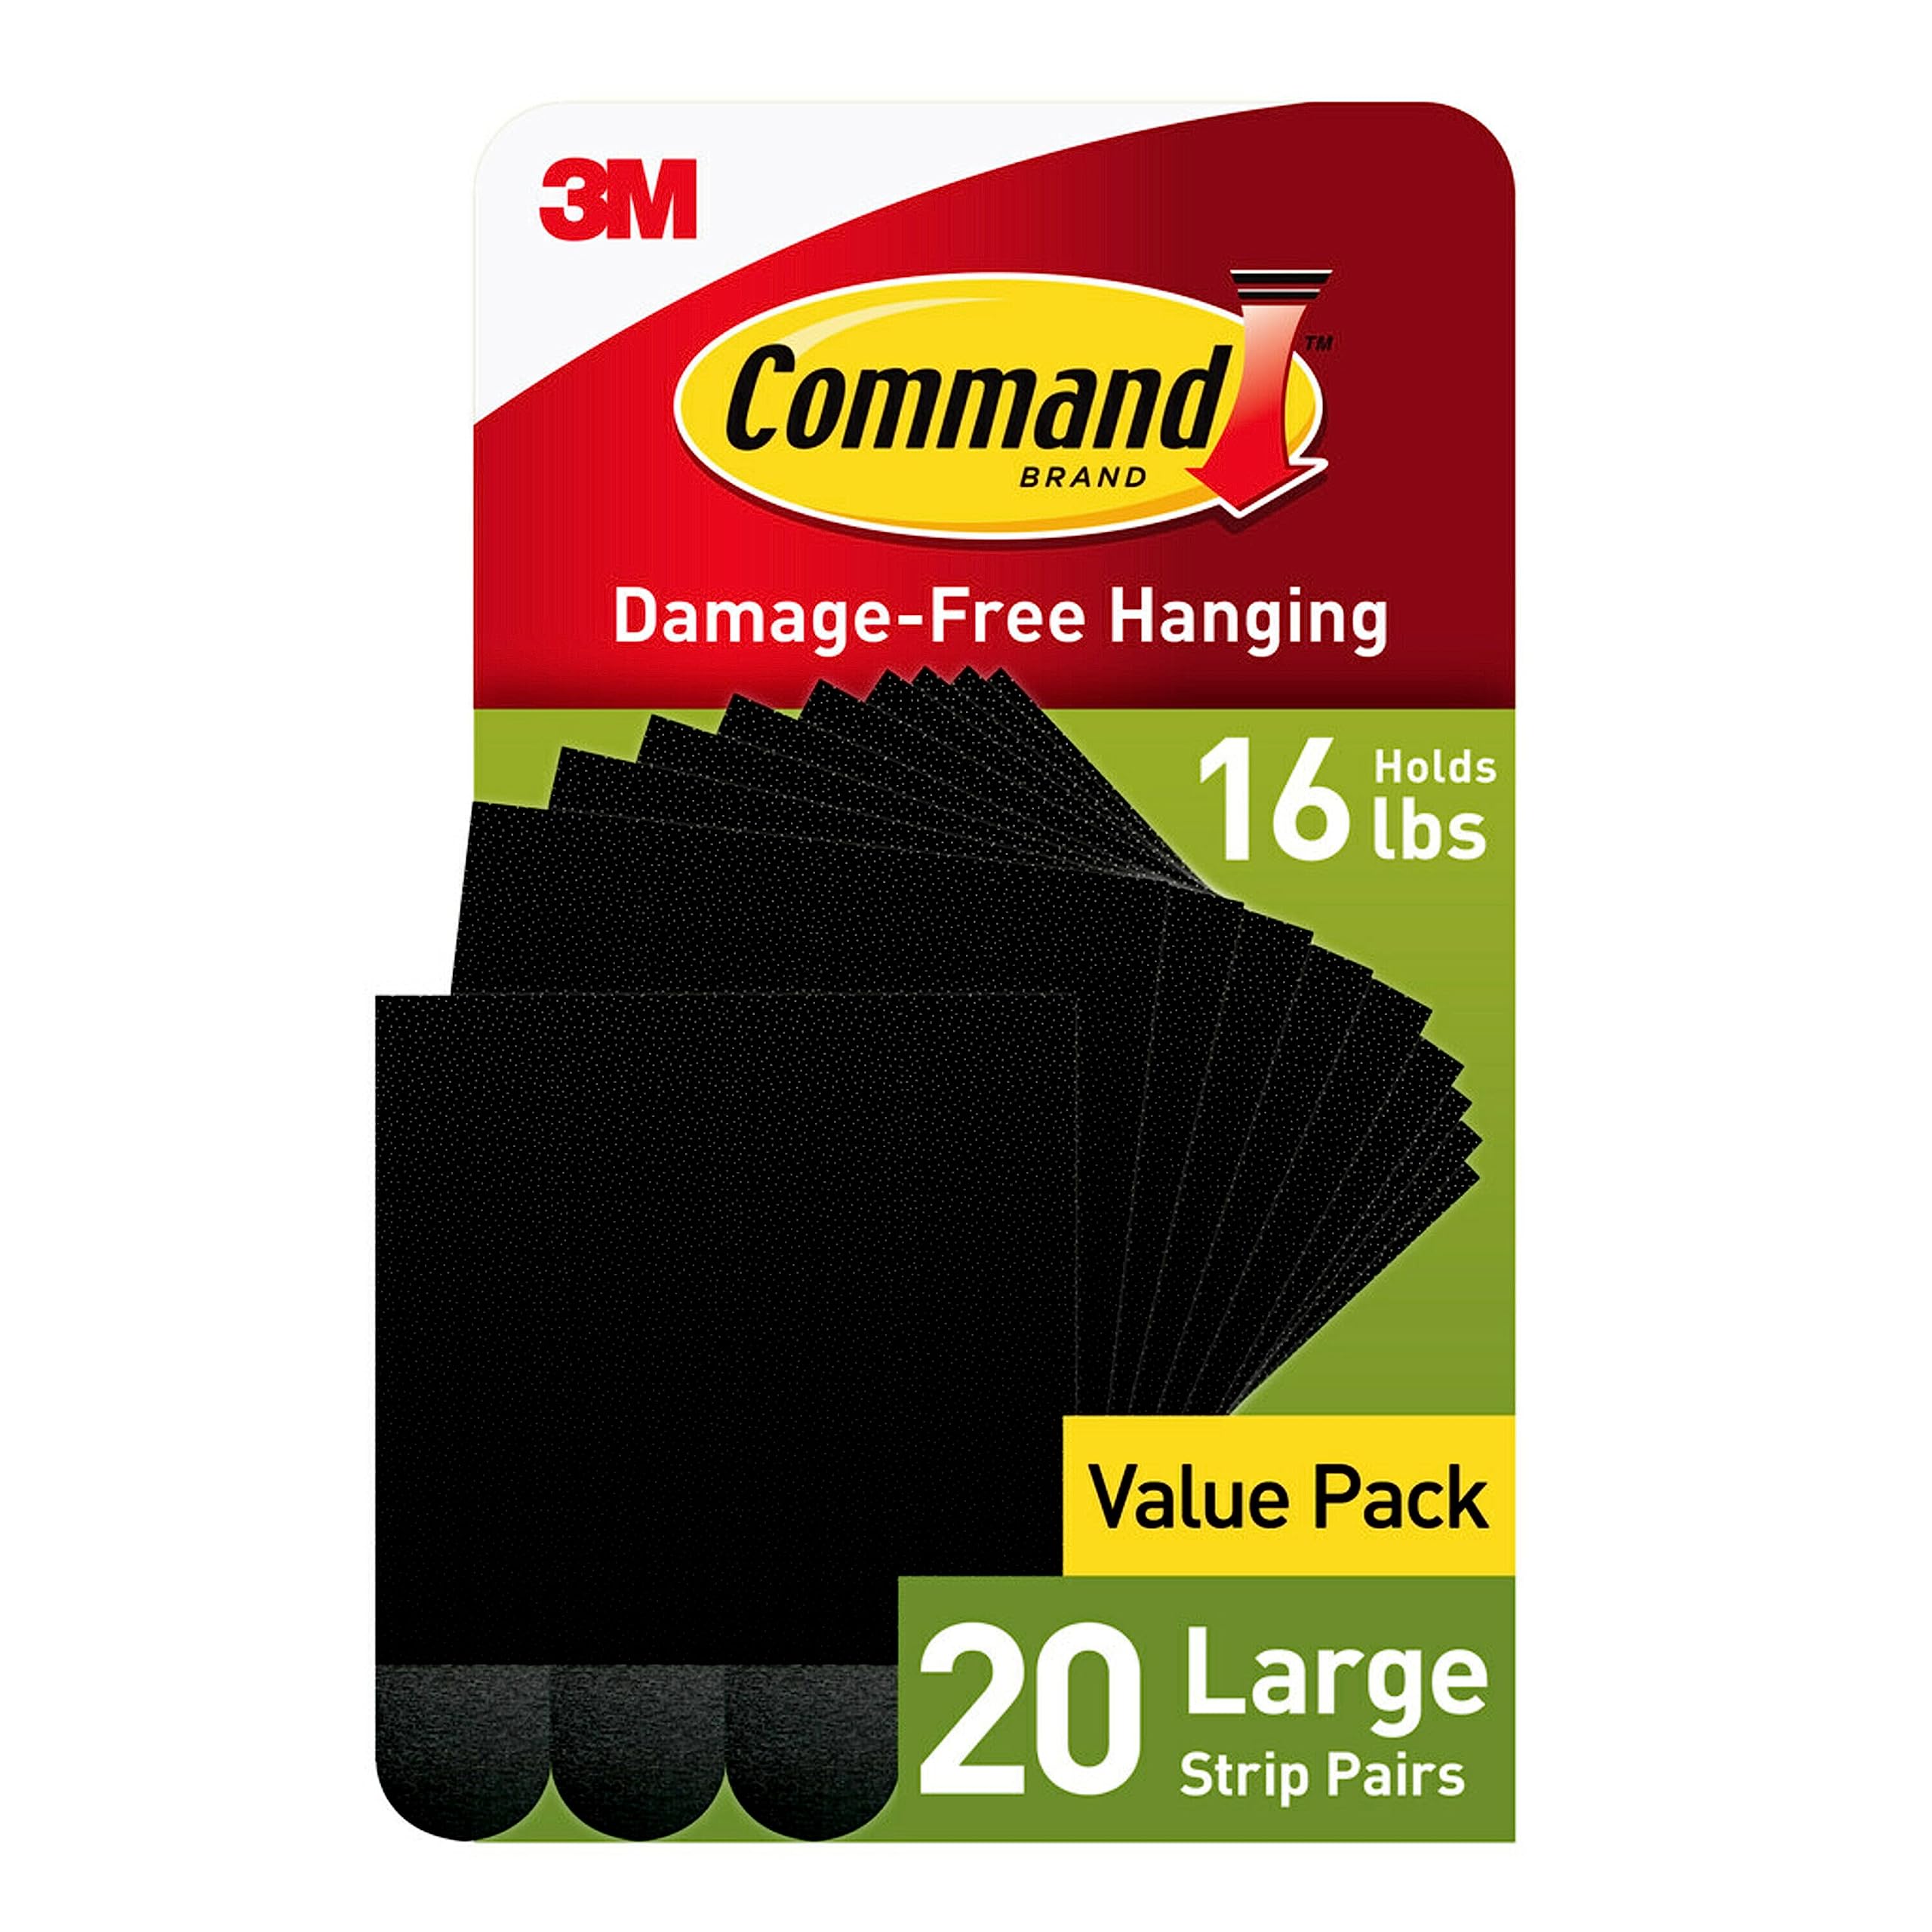 Command Jumbo Picture Hanging Strips, Black, 8 Pairs